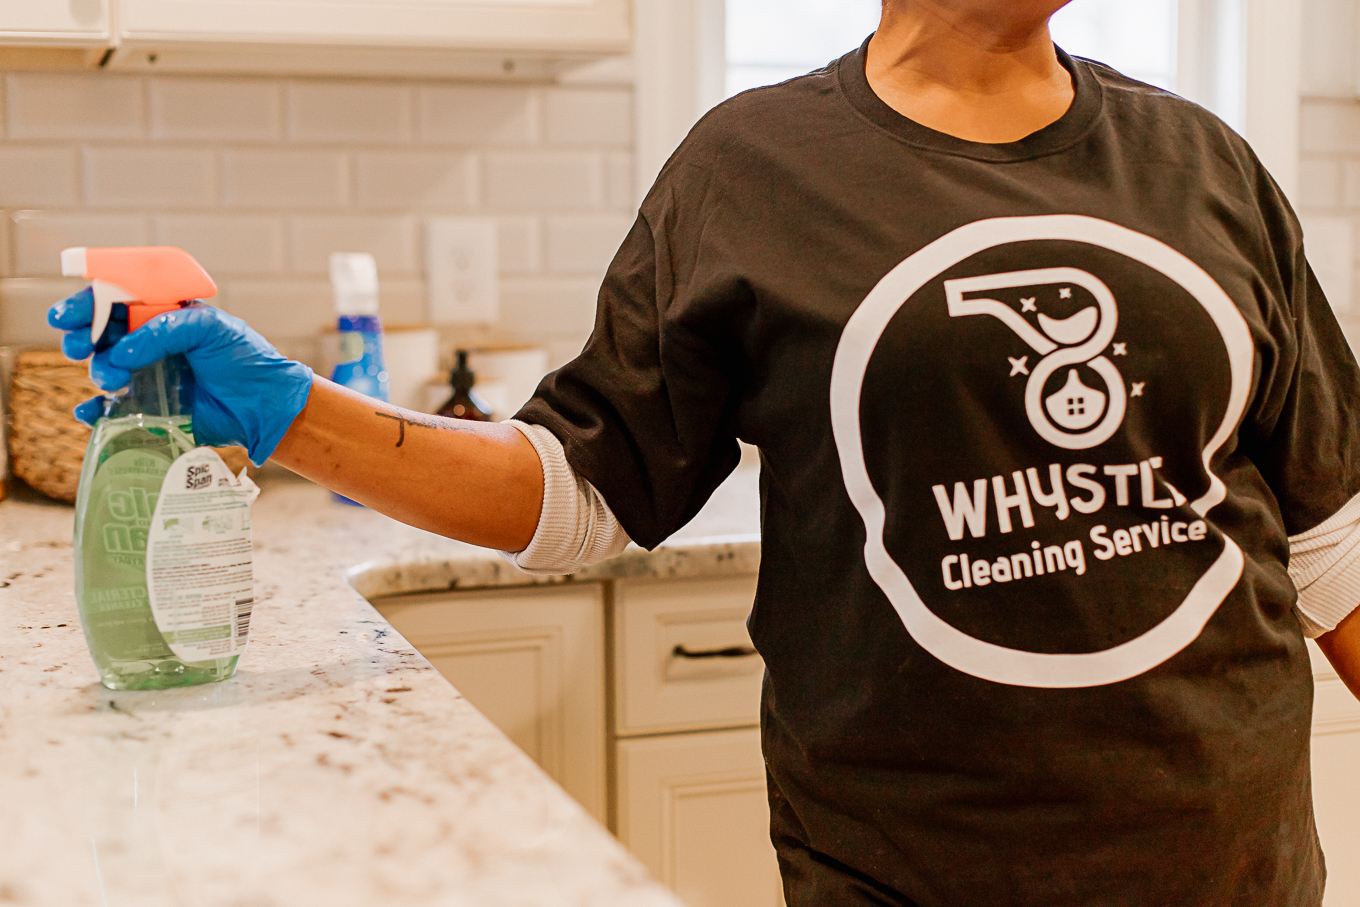 Whystle Cleaning Services | lifestyle | Louella Reese